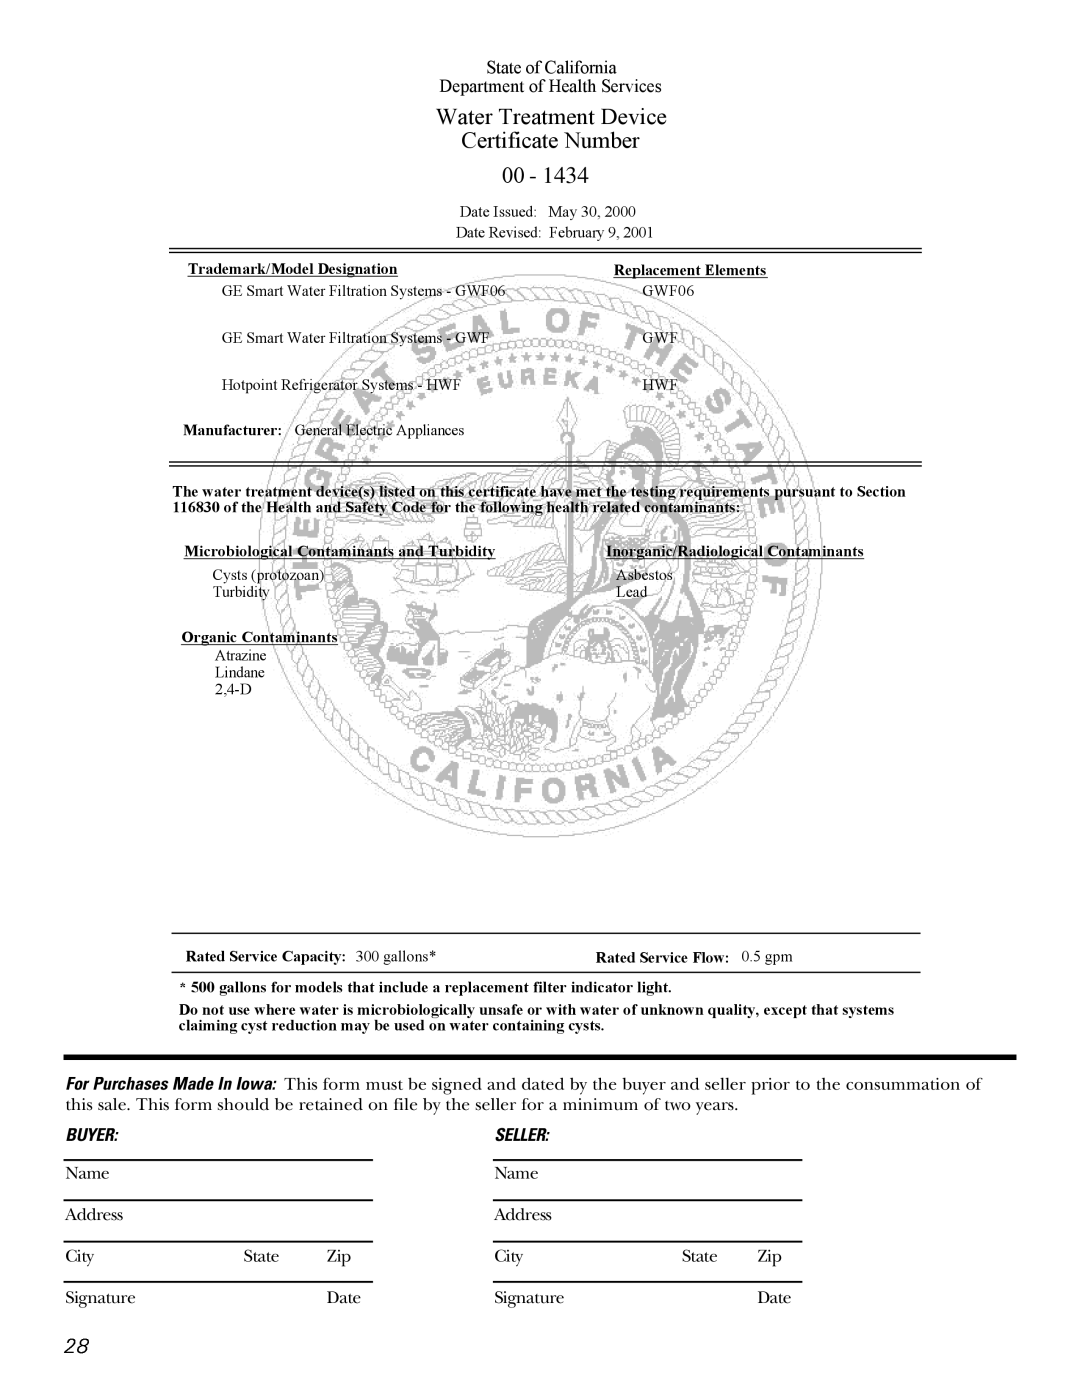 GE 20, 25, 22 manual Water Treatment Device Certificate Number 00, State of California Department of Health Services 